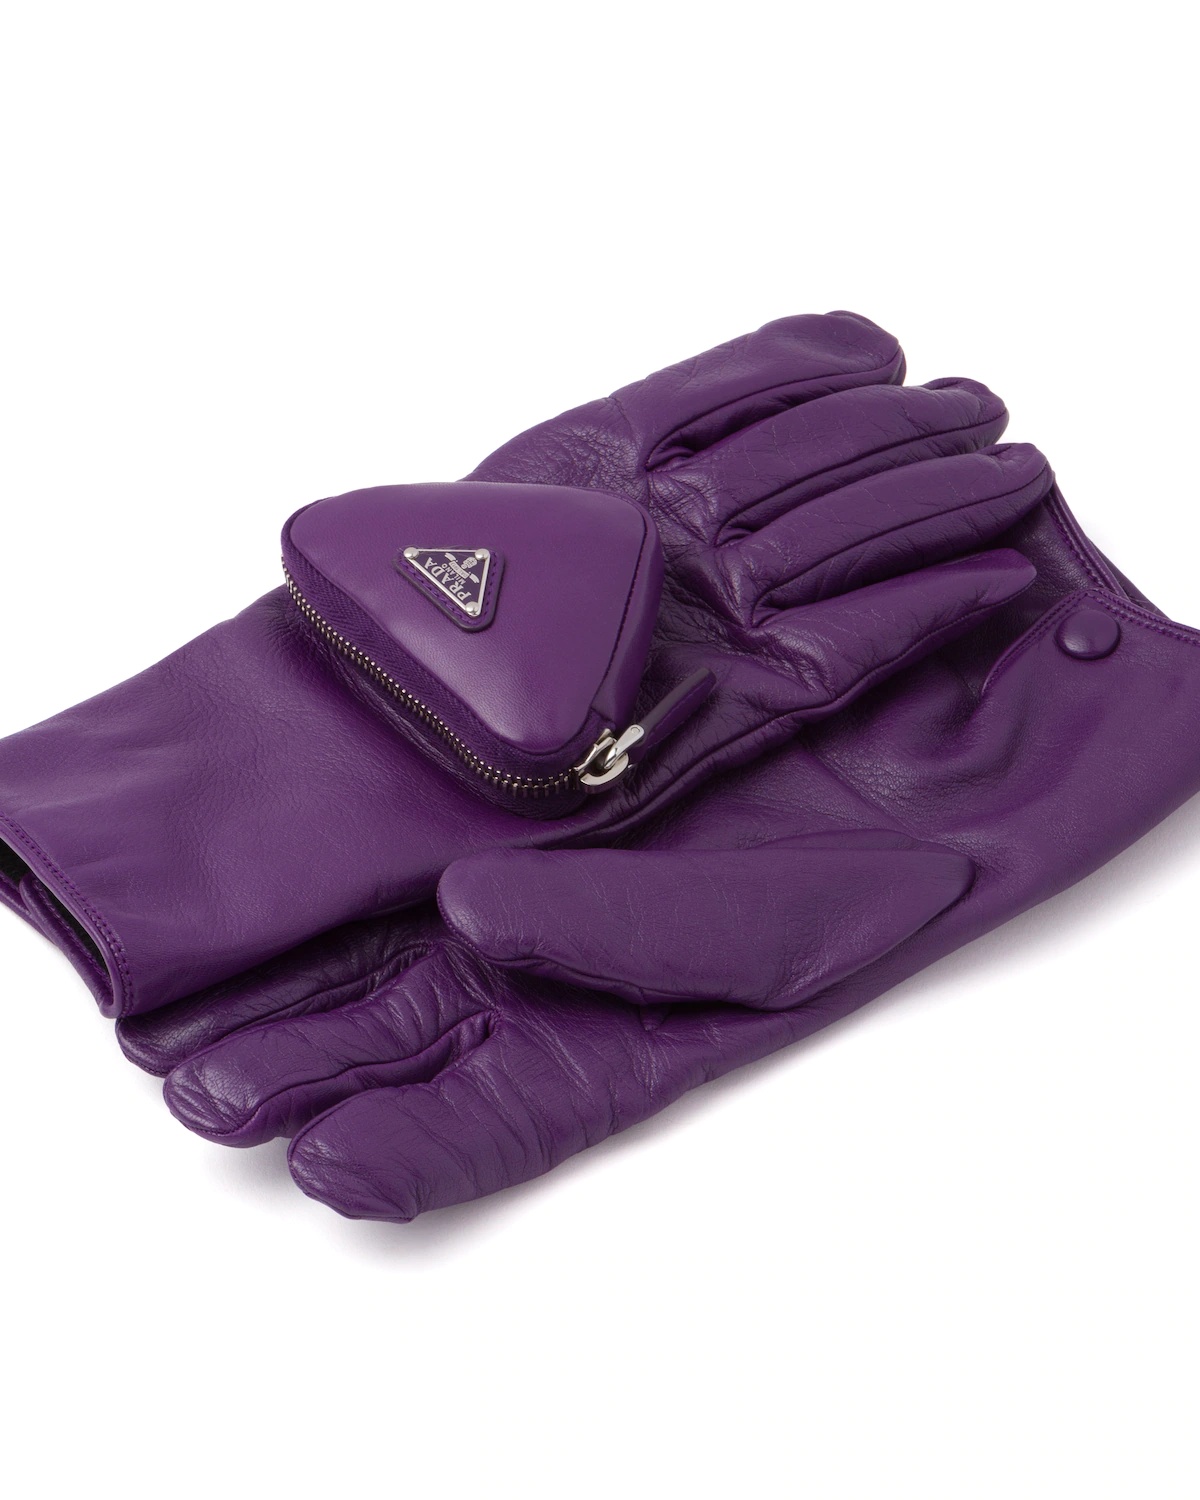 Nappa leather gloves with pouch - 3